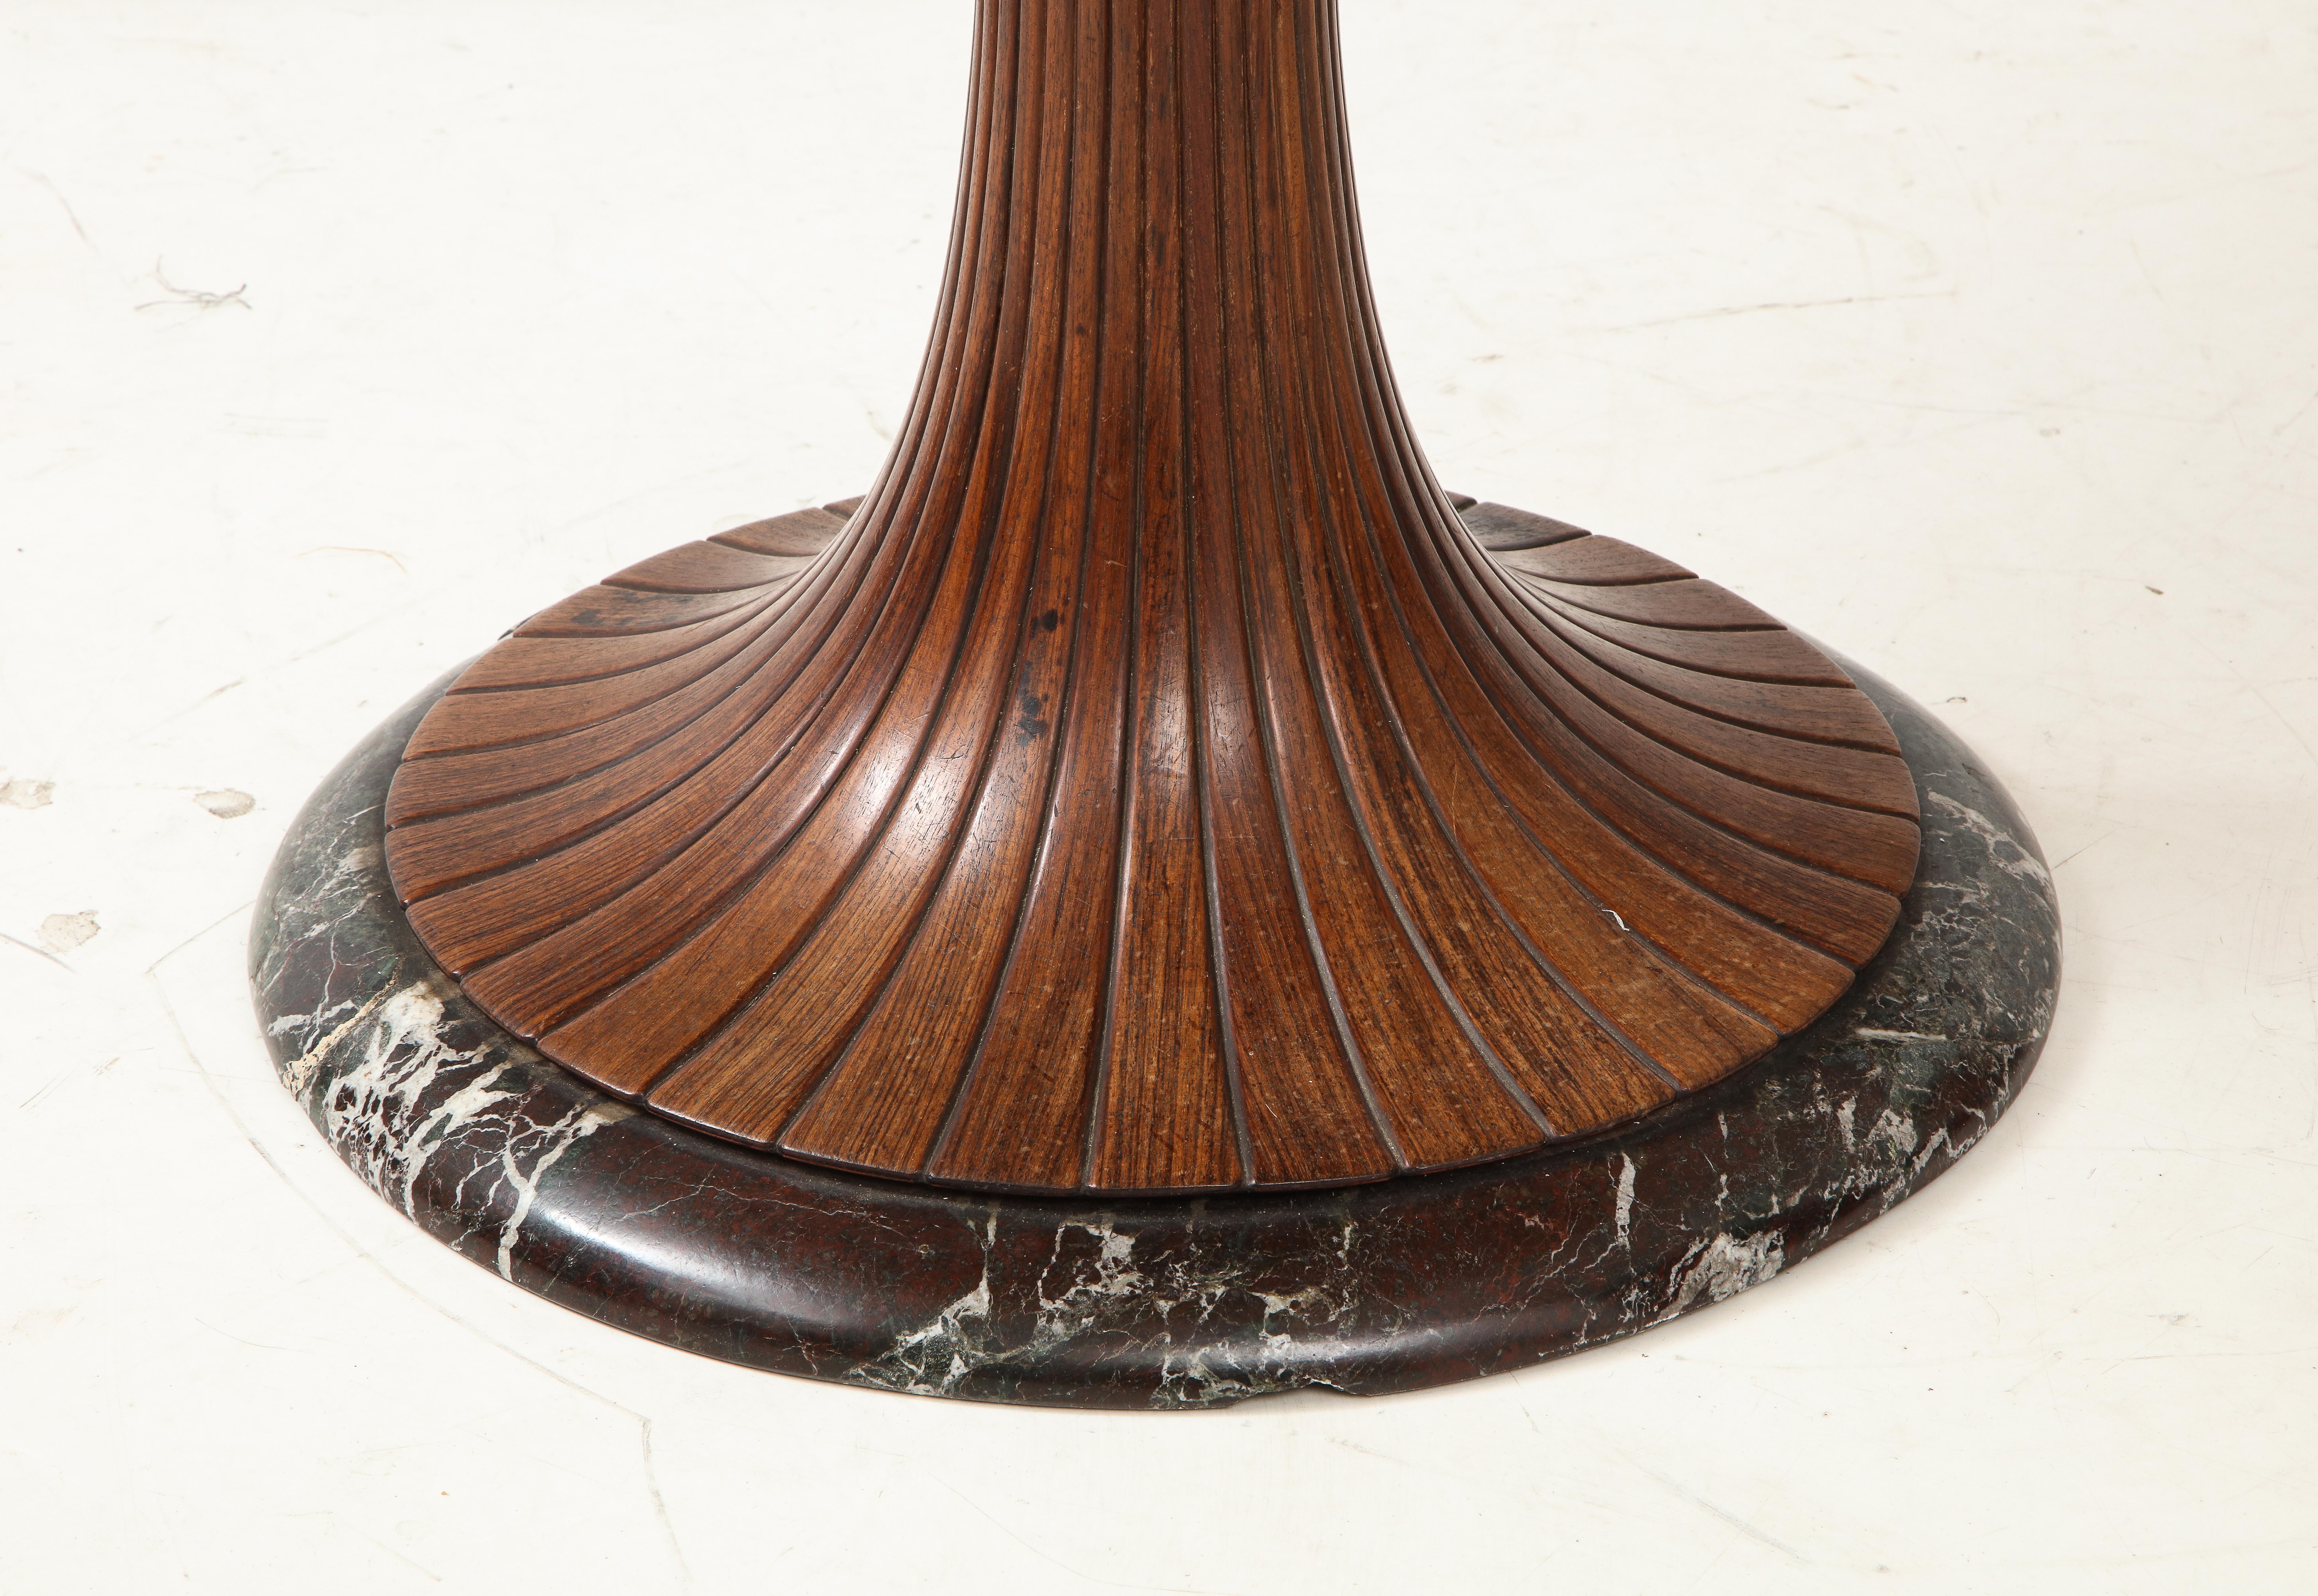 An Osvaldo Borsani tulip shaped dining table or center table. Designed for Arredamento Borsani, Italy, 1950s. The tulip shaped walnut base is elegantly carved and fluted, with a marble surround at the base; the top a beautifully contrasted